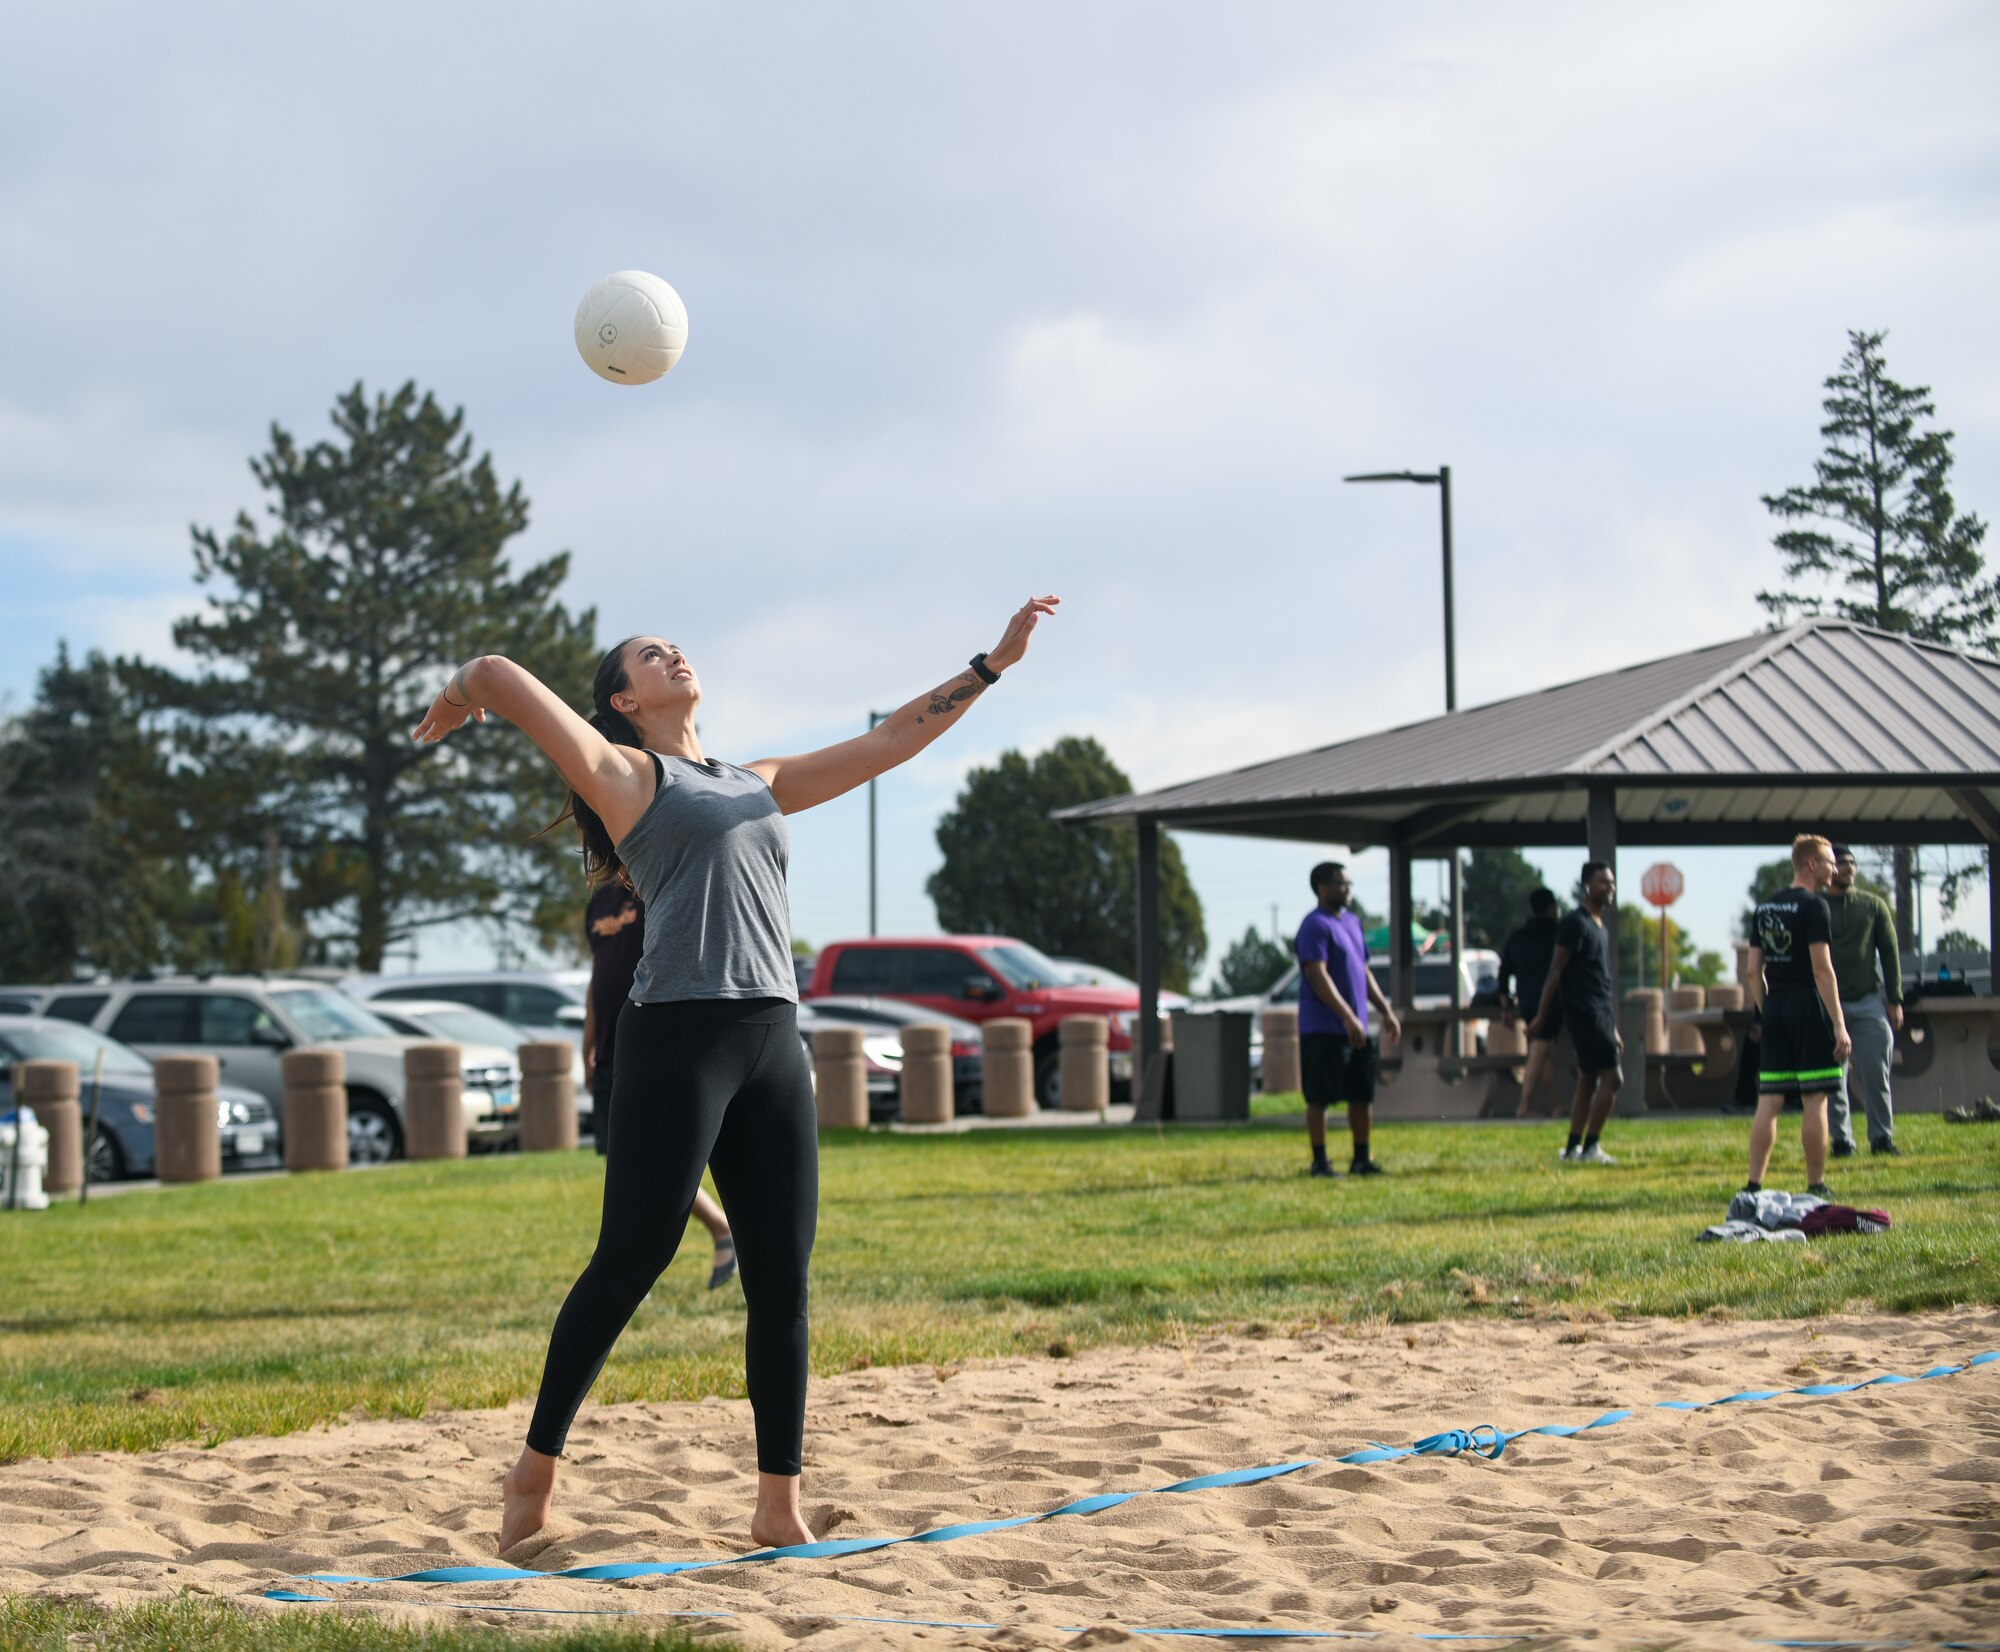 Airman 1st Class Yasmin Chraibi, a 460th Contracting Squadron contracting specialist, serves a volleyball at the Panther Dorm volleyball court on Buckley Air Force Base, Colo.